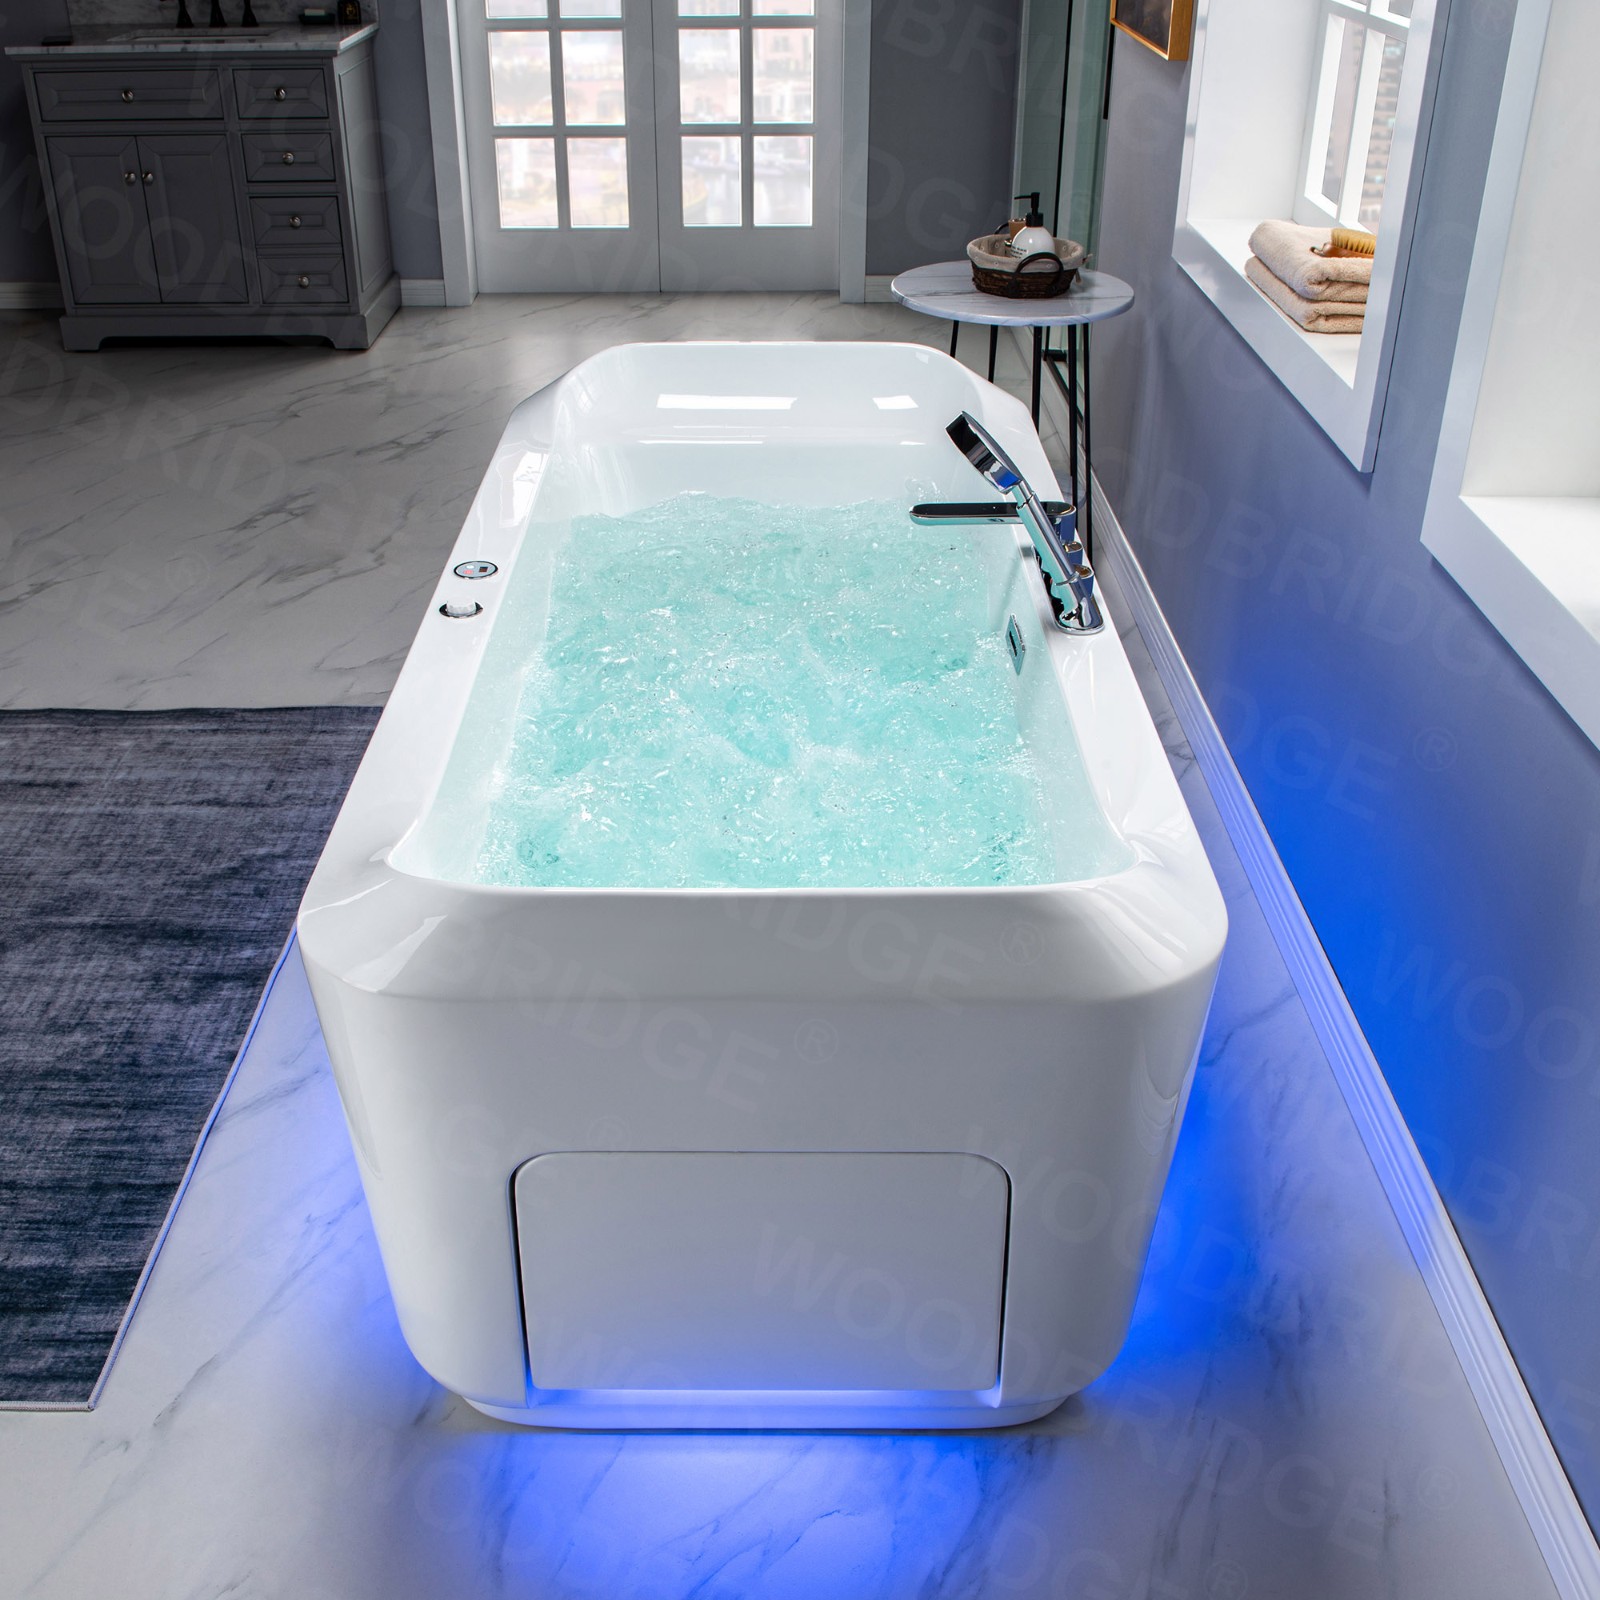  1 Person Freestanding Massage Hydrotherapy Bathtub Tub Hot Tub Spa, with Inline Heater. BTS-0092_9088